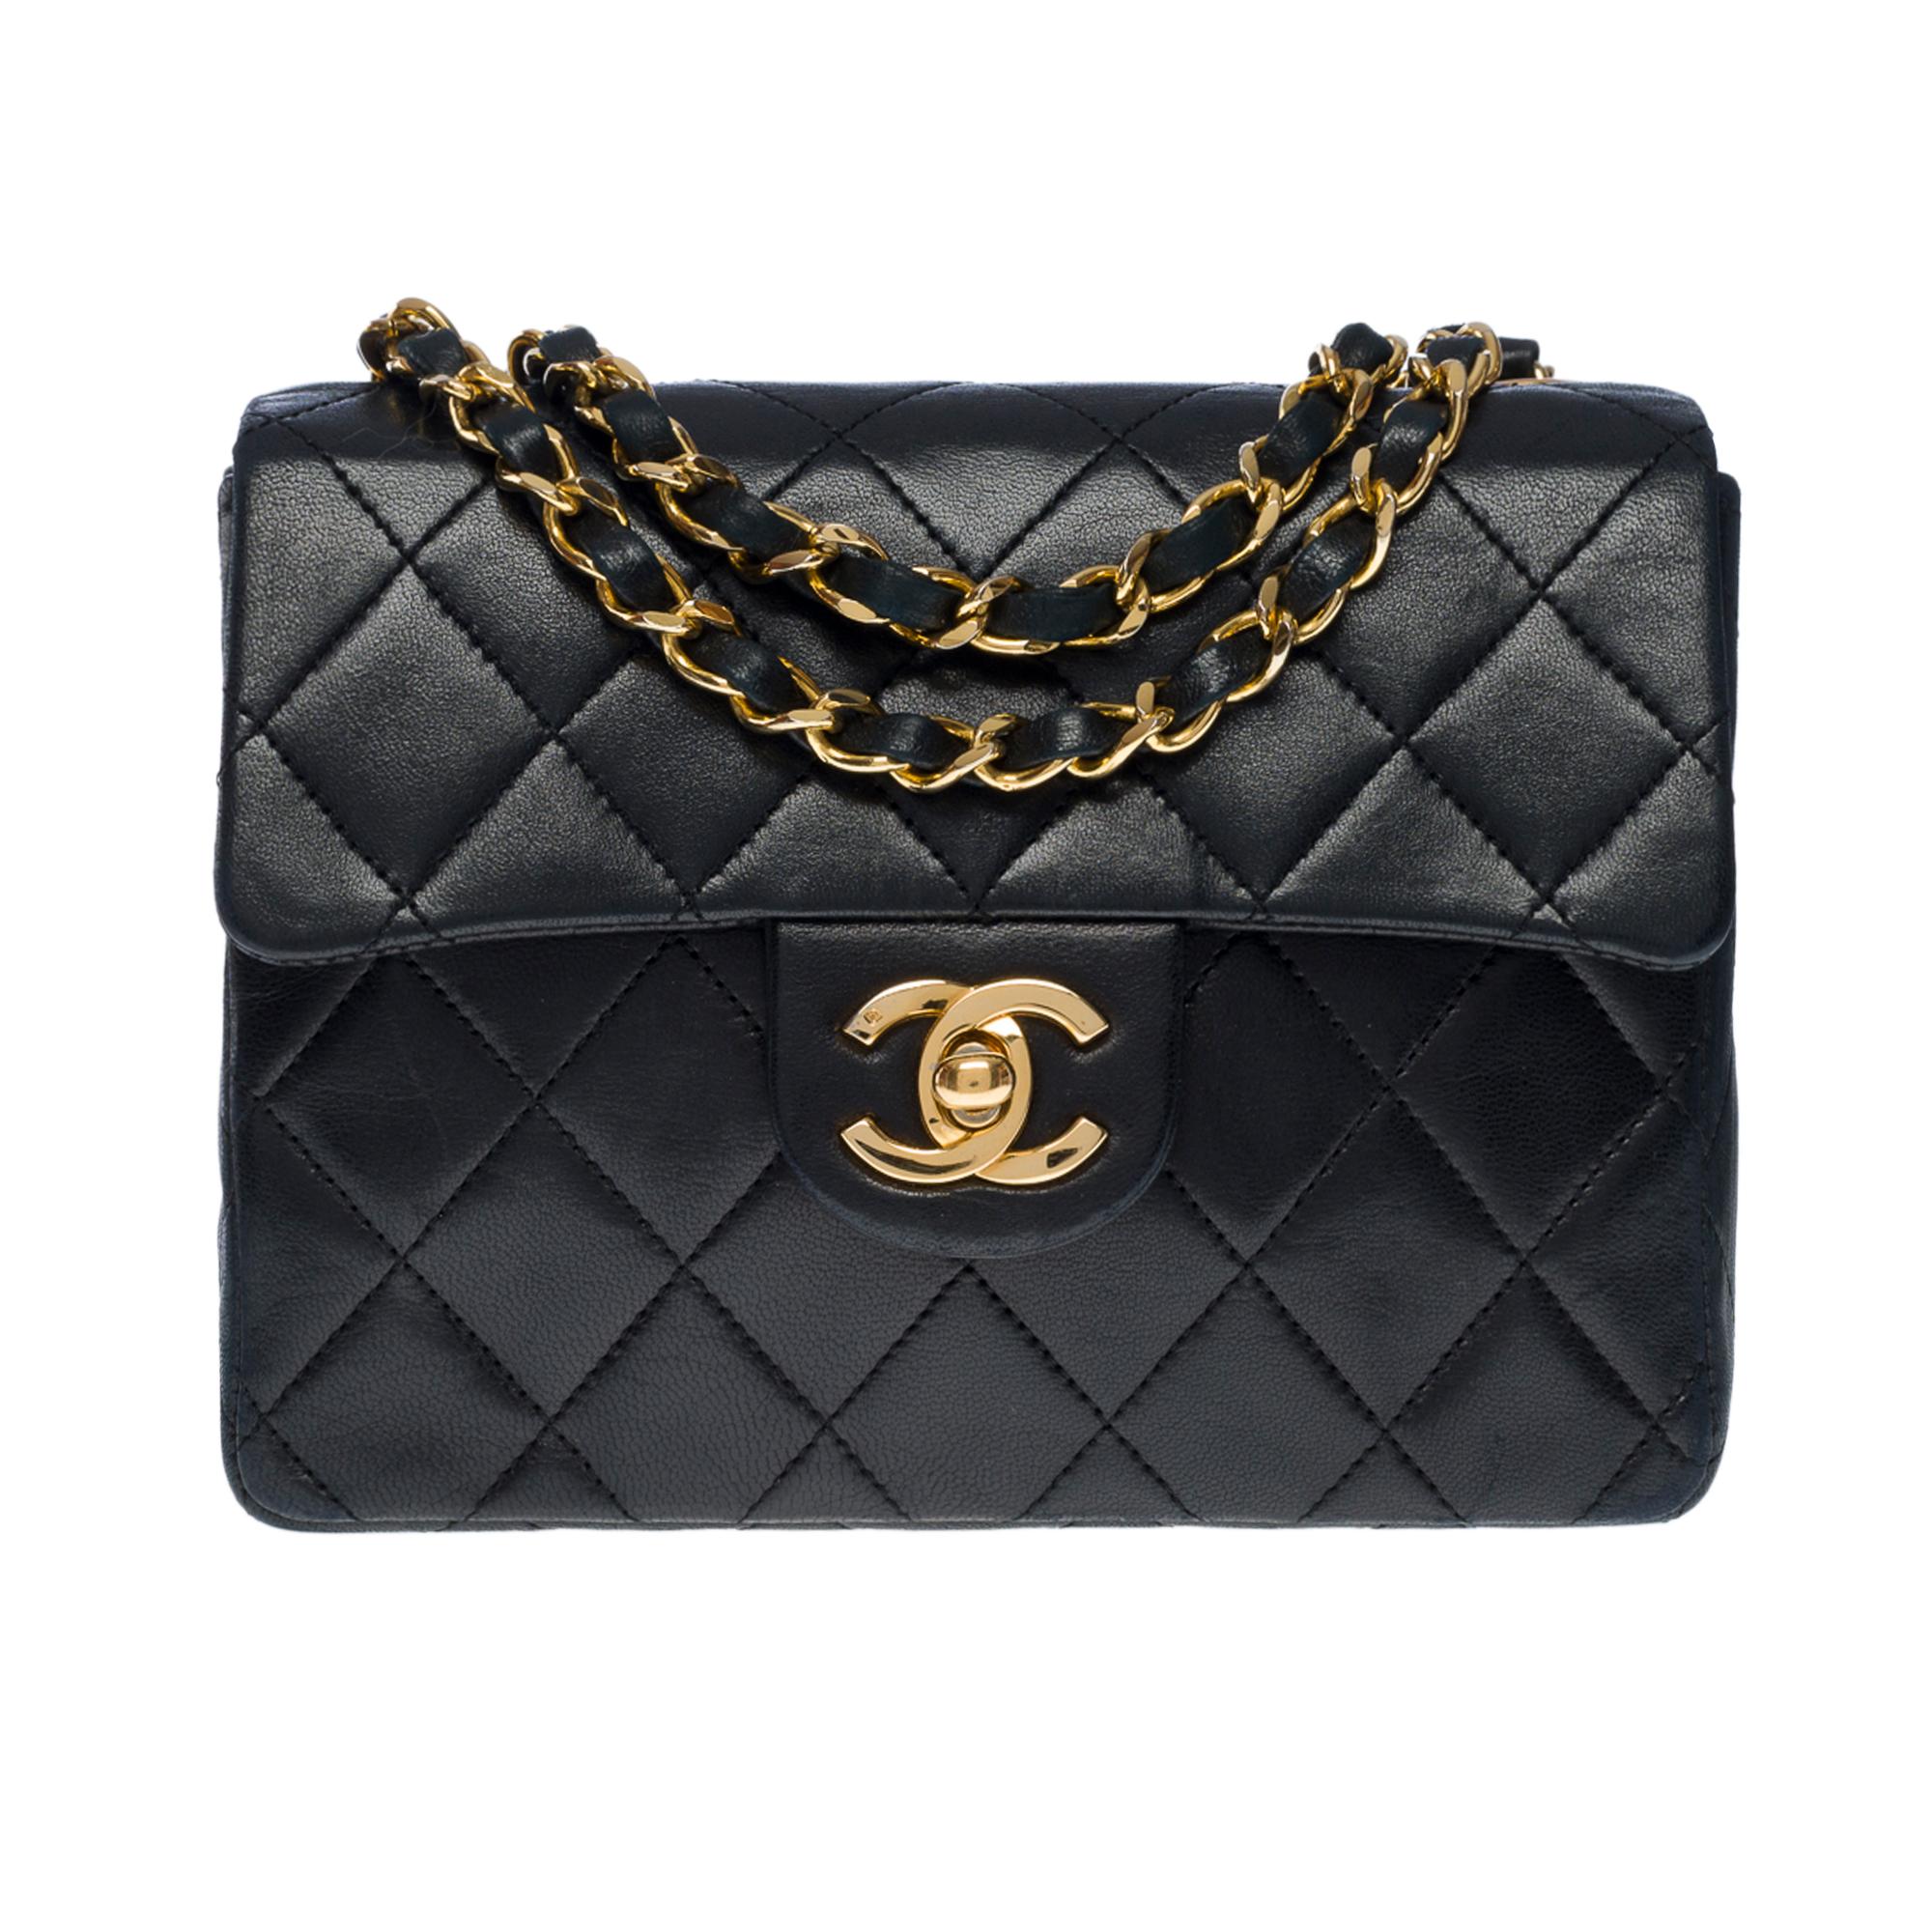 Exquisite Chanel Mini Timeless Square flap bag in black quilted lambskin leather, shoulder strap in gold metal interlaced with black lambskin for a hand, shoulder or shoulder strap
Flap closure and gold metal turnstile closure
Burgundy lambskin